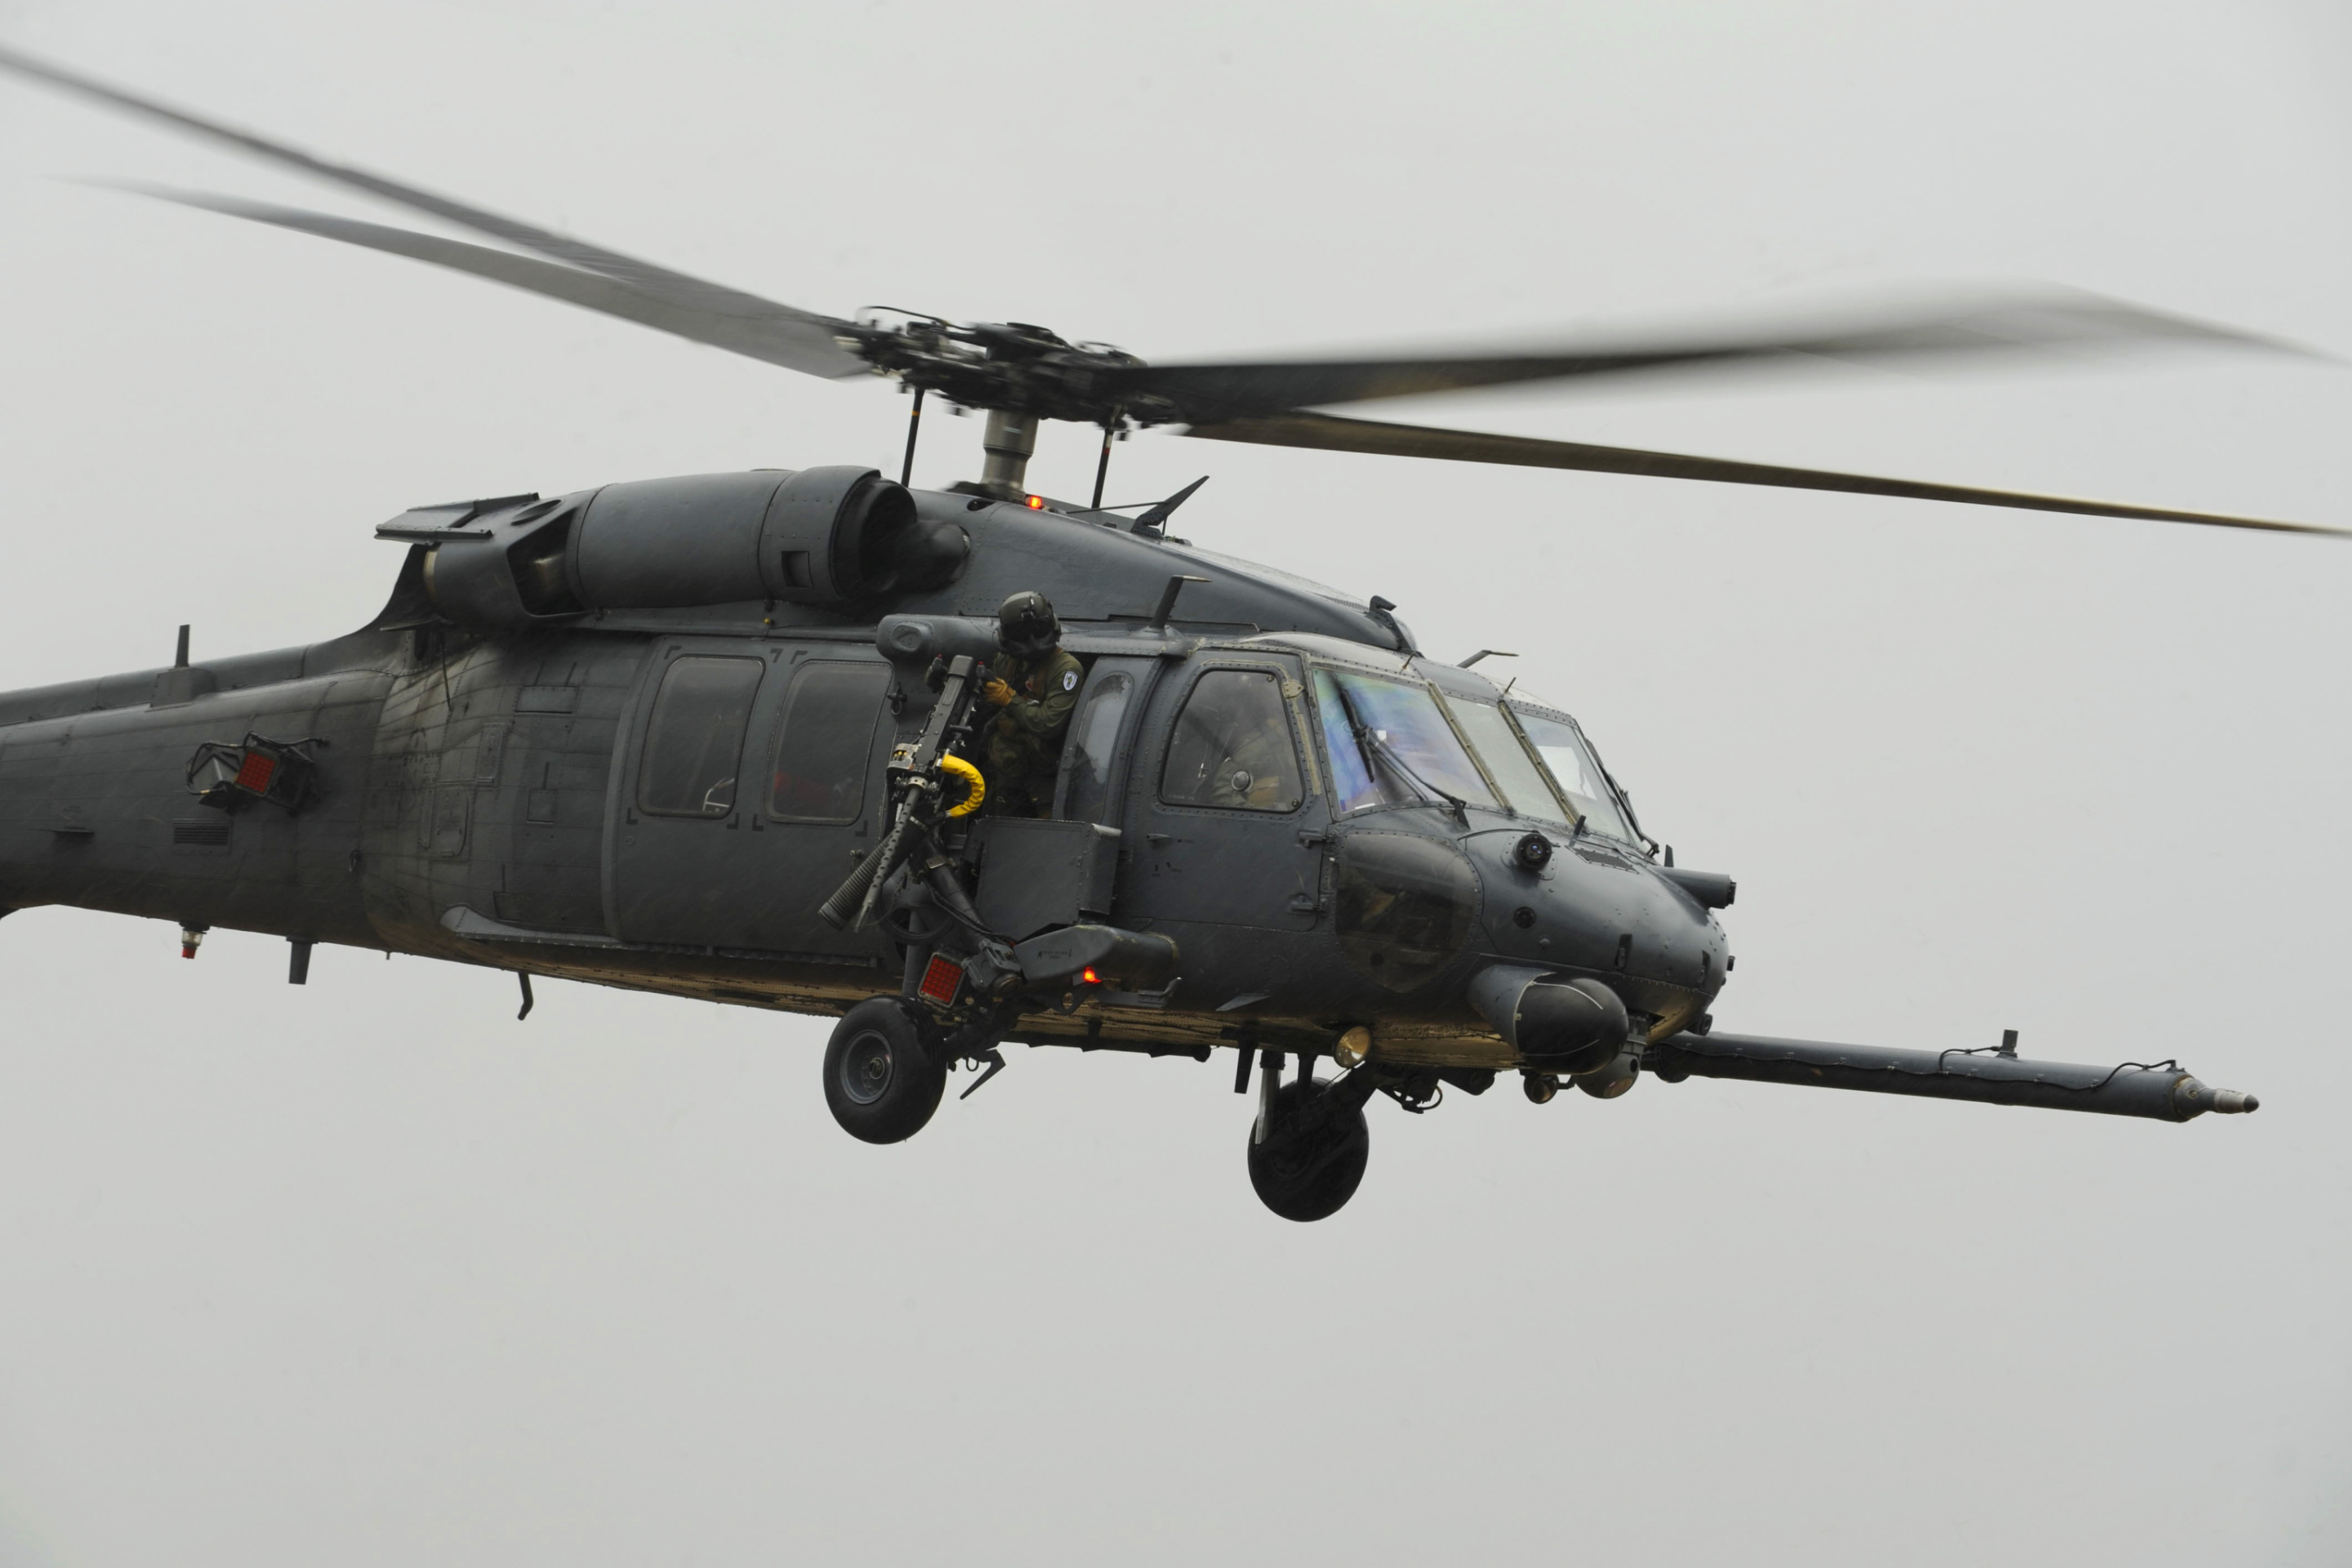 Das Helicopter Sikorsky HH 60 Pave Hawk Wallpaper 2880x1920